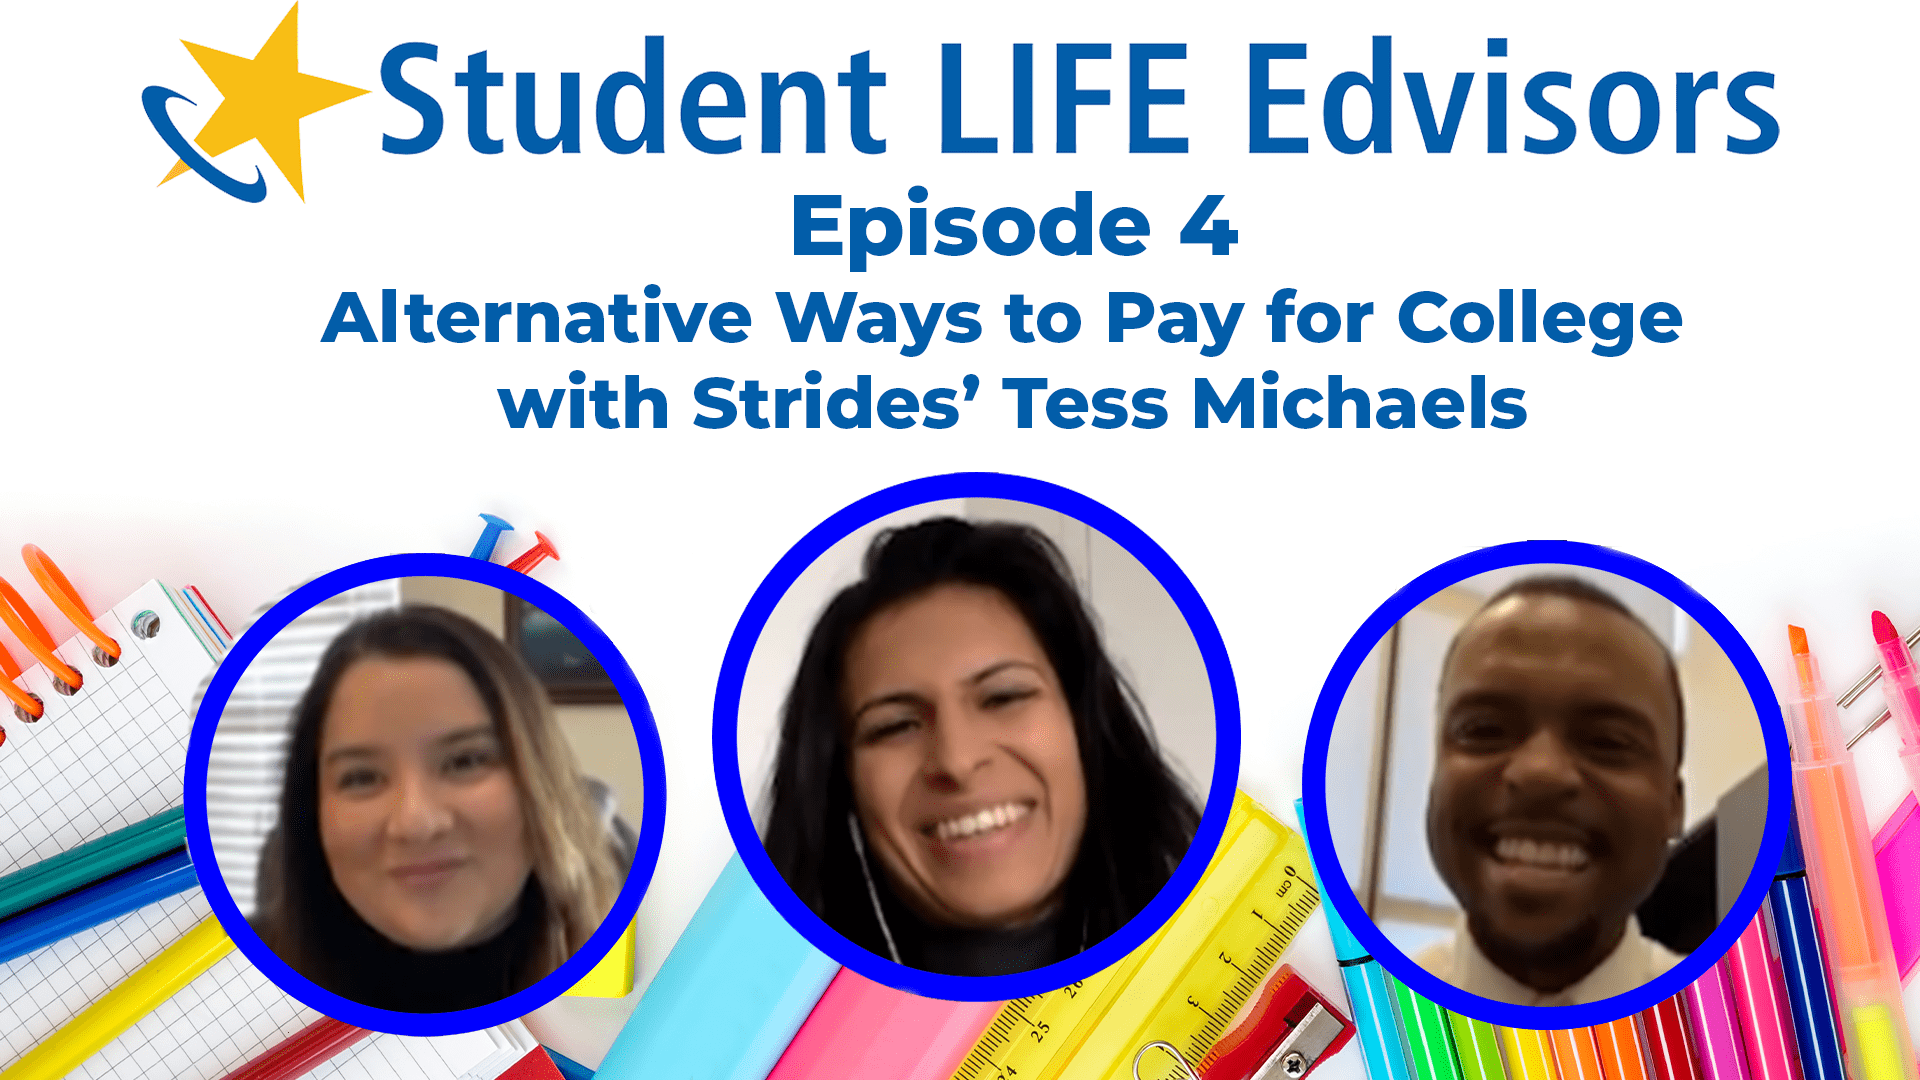 Episode 4- Alternative Ways to Pay for College with Stride's Tess Michaels